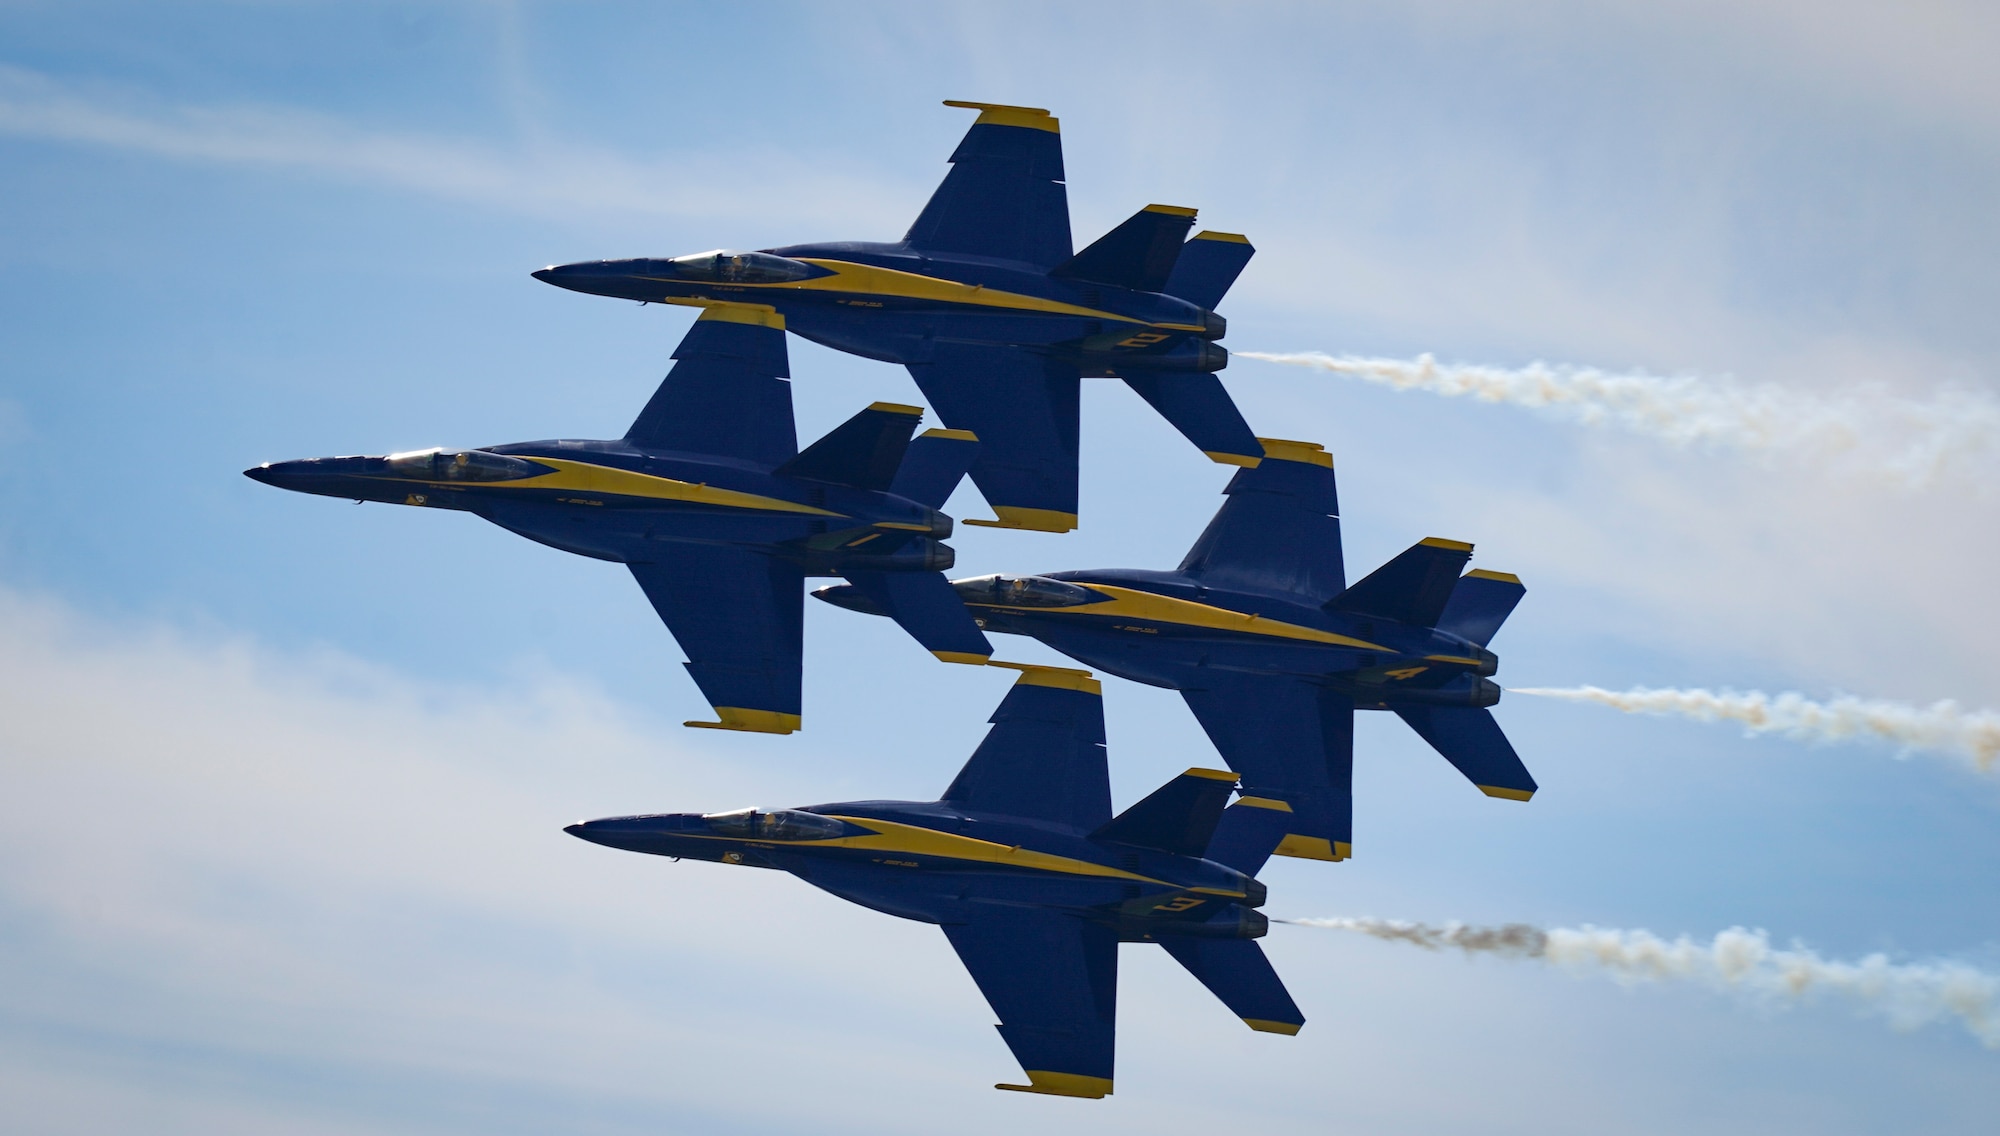 U.S. Navy Blue Angels perform during the Beyond the Horizon Air and Space Show at Maxwell Air Force Base, Ala. April 6, 2024. The air and space show boasted a variety of activities, including military and civilian aerial demonstrations, static display aircraft, and a STEM expo. Organized by Maxwell Air Force Base in collaboration with civilian partners and sponsors, the event aimed to celebrate the rich heritage of aviation while also providing an opportunity for the public to engage with the military community. (U.S. Air Force Photo Senior Master Sgt. Richard P. Ebensberger)